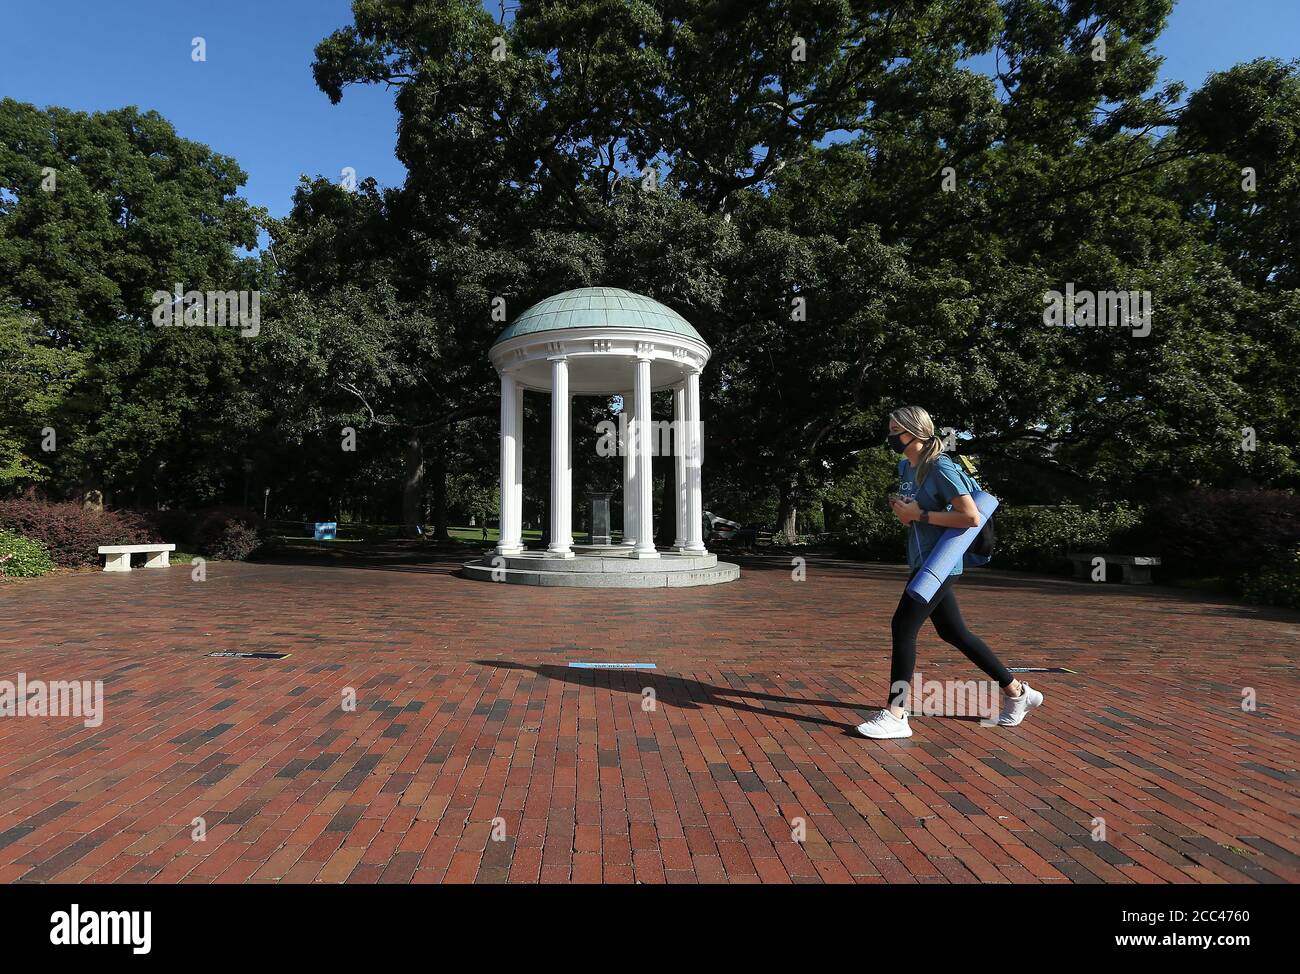 Chapel Hill, North Carolina, USA. 18th Aug, 2020. Freshman MARIA SMITH of Denton, NC walks past the iconic Old Well on the campus of UNC-Chapel Hill. The school will move all undergraduate classes online starting Wednesday, after 130 more students tested positive for the coronavirus. There have been reports of four COVID-19 clusters over three days in dorms, apartments and a fraternity house. Credit: Bob Karp/ZUMA Wire/Alamy Live News Stock Photo